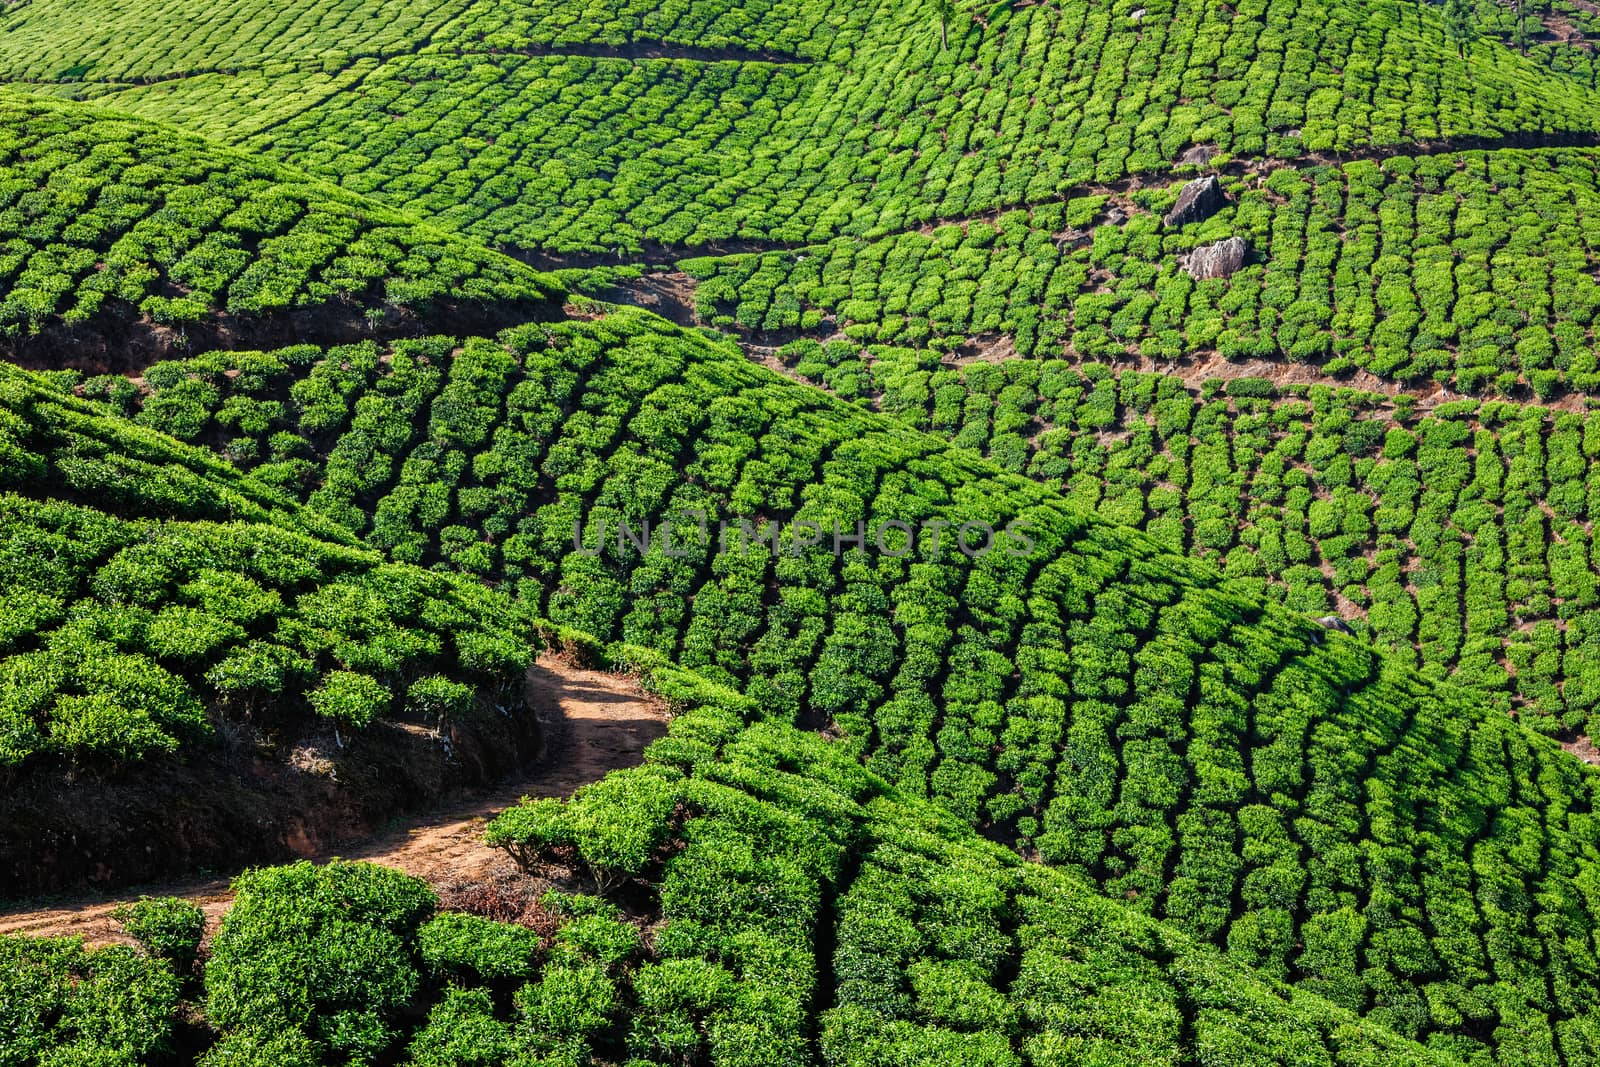 Tea plantations in India by dimol